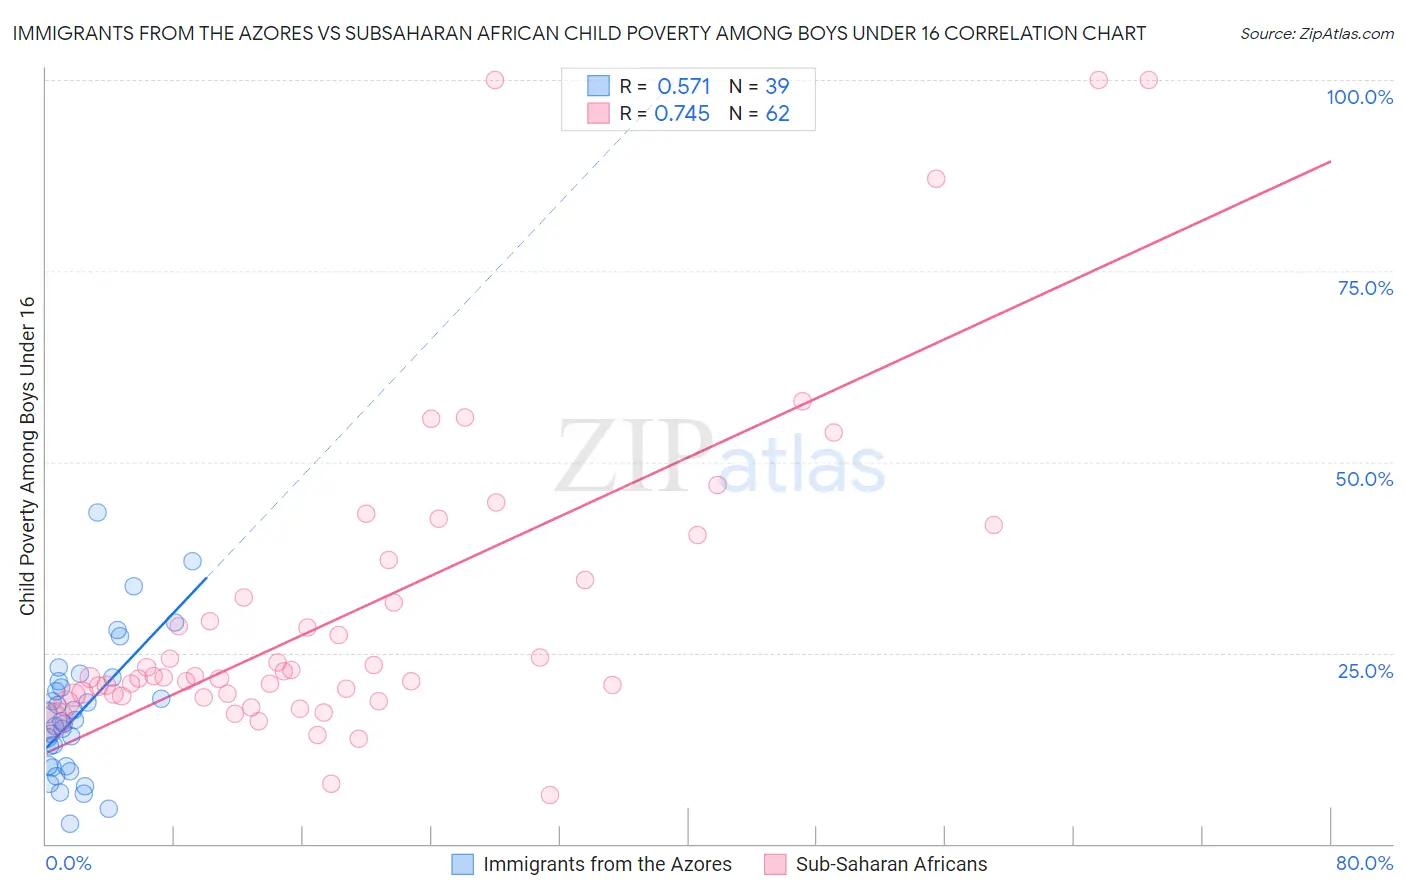 Immigrants from the Azores vs Subsaharan African Child Poverty Among Boys Under 16